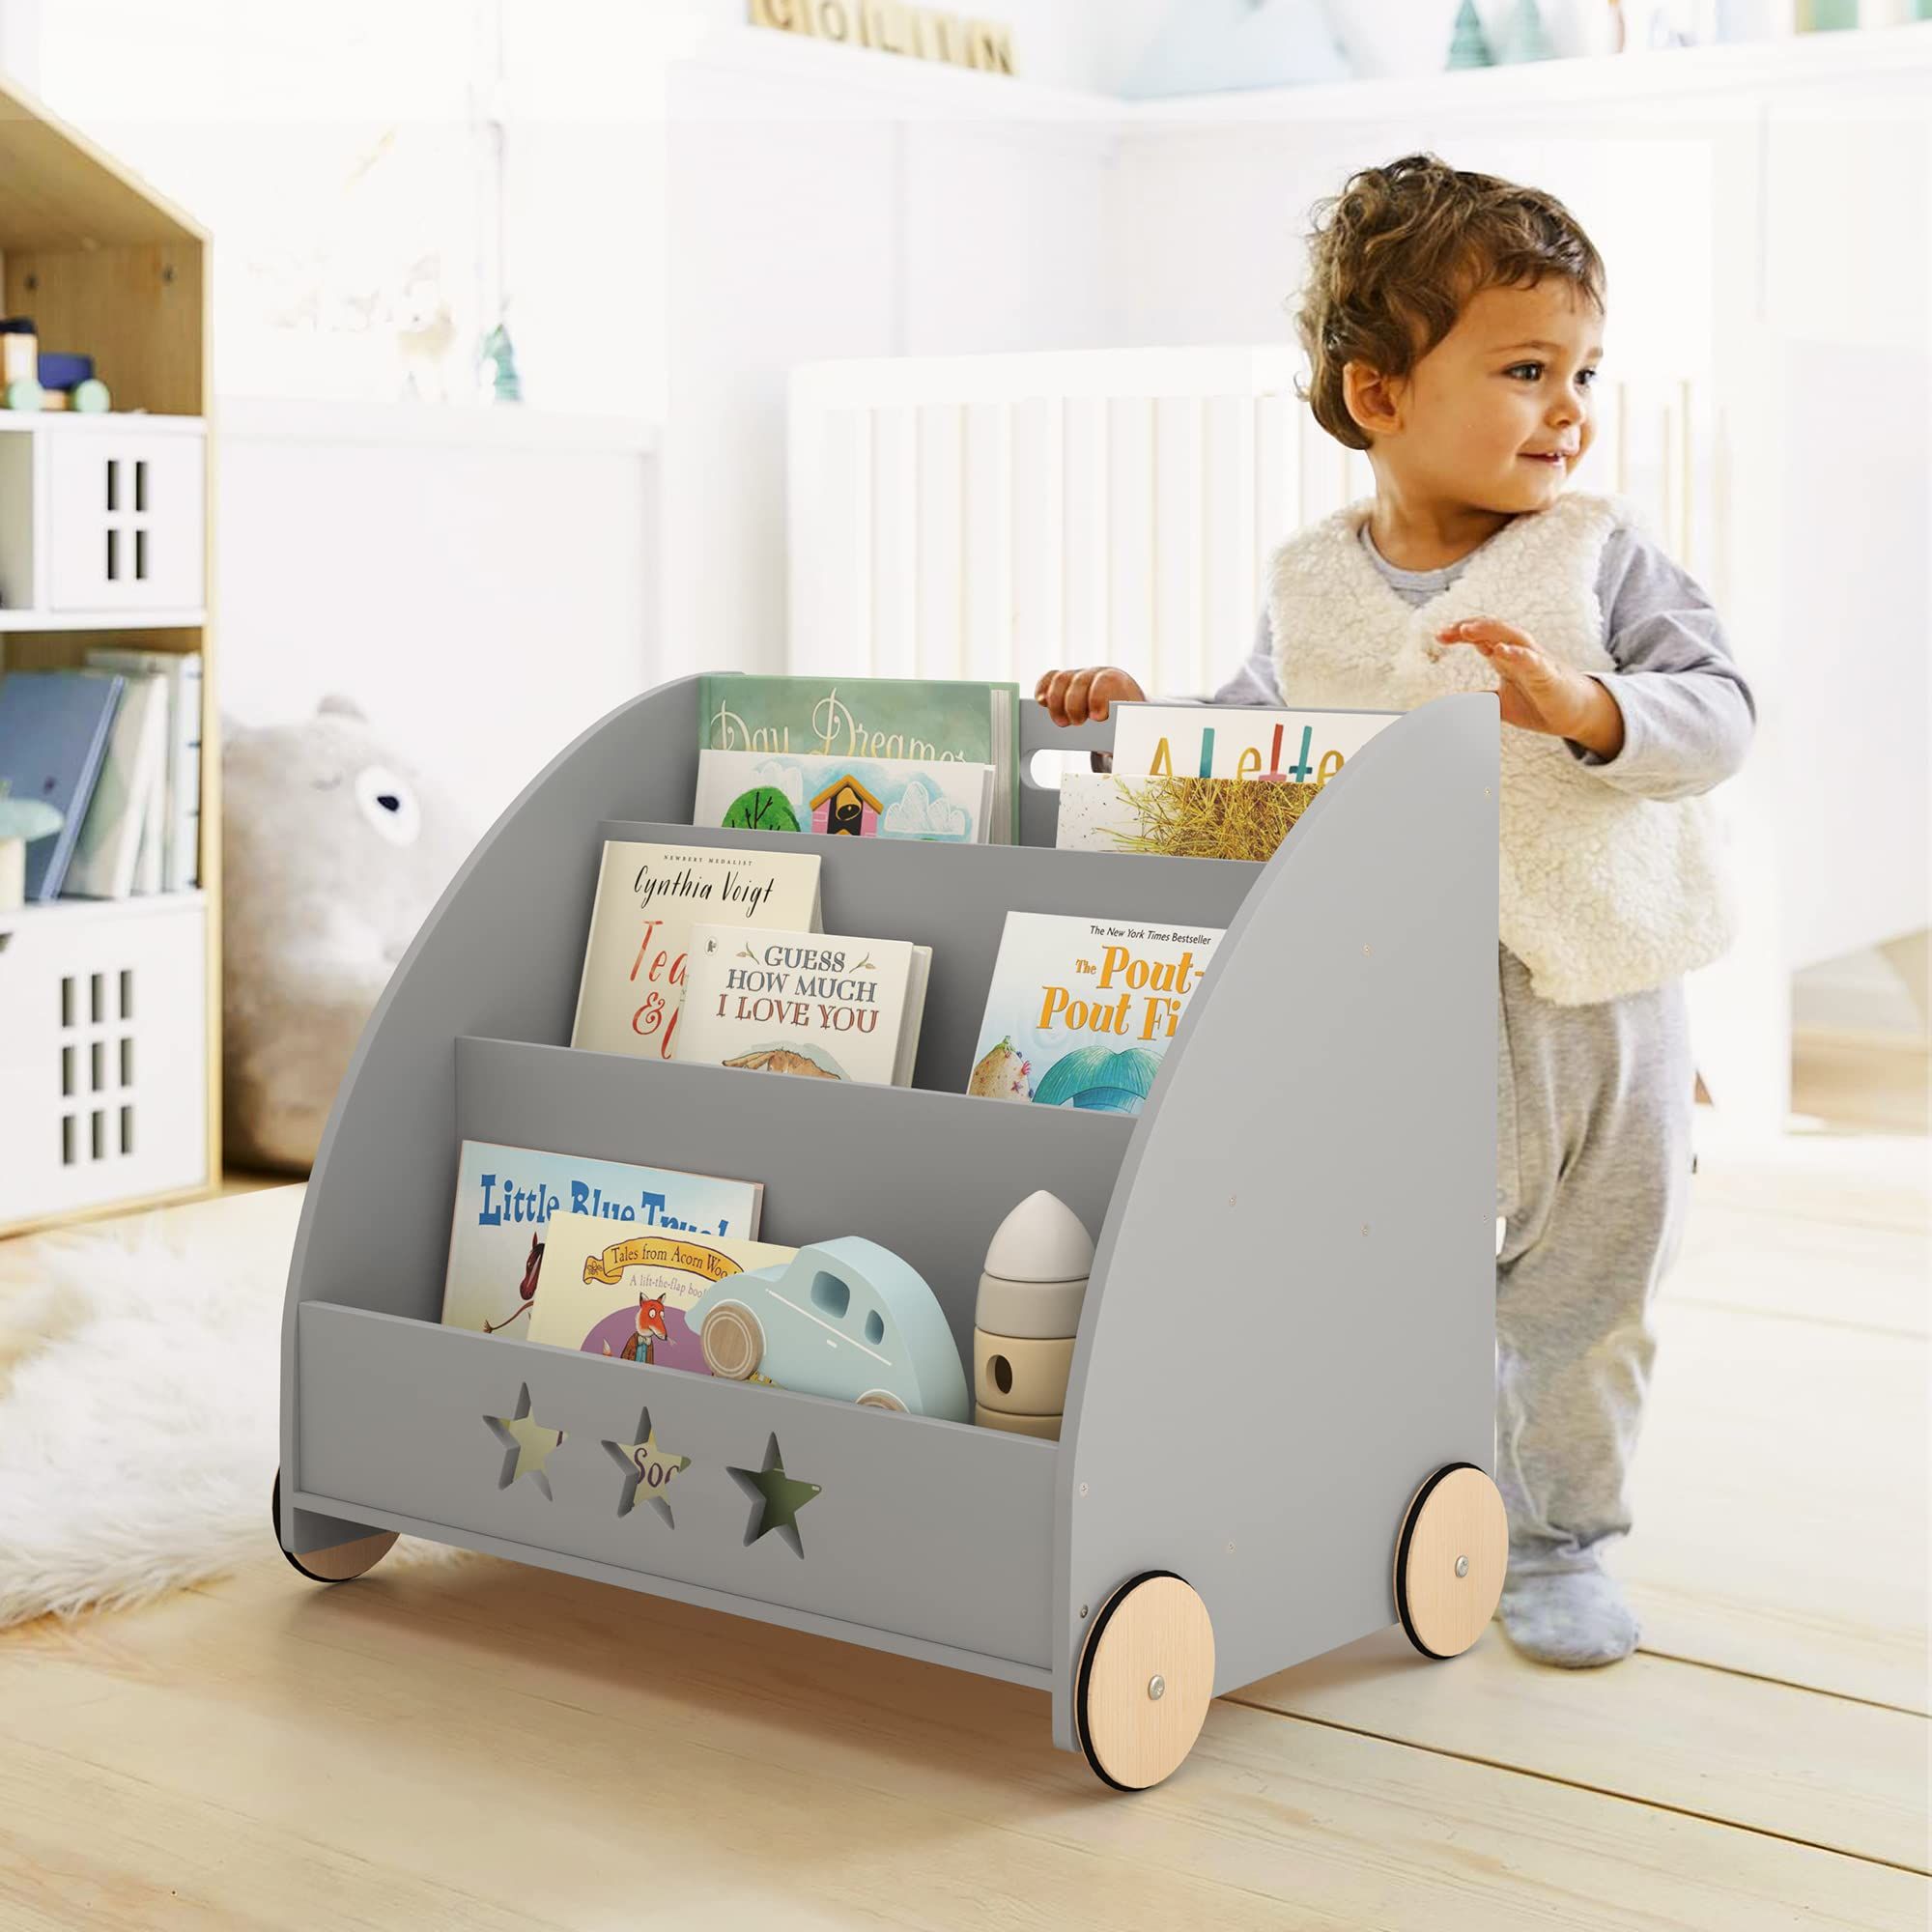 A Practical Storage Solution for Children’s Books: Bookcases with Built-In Storage